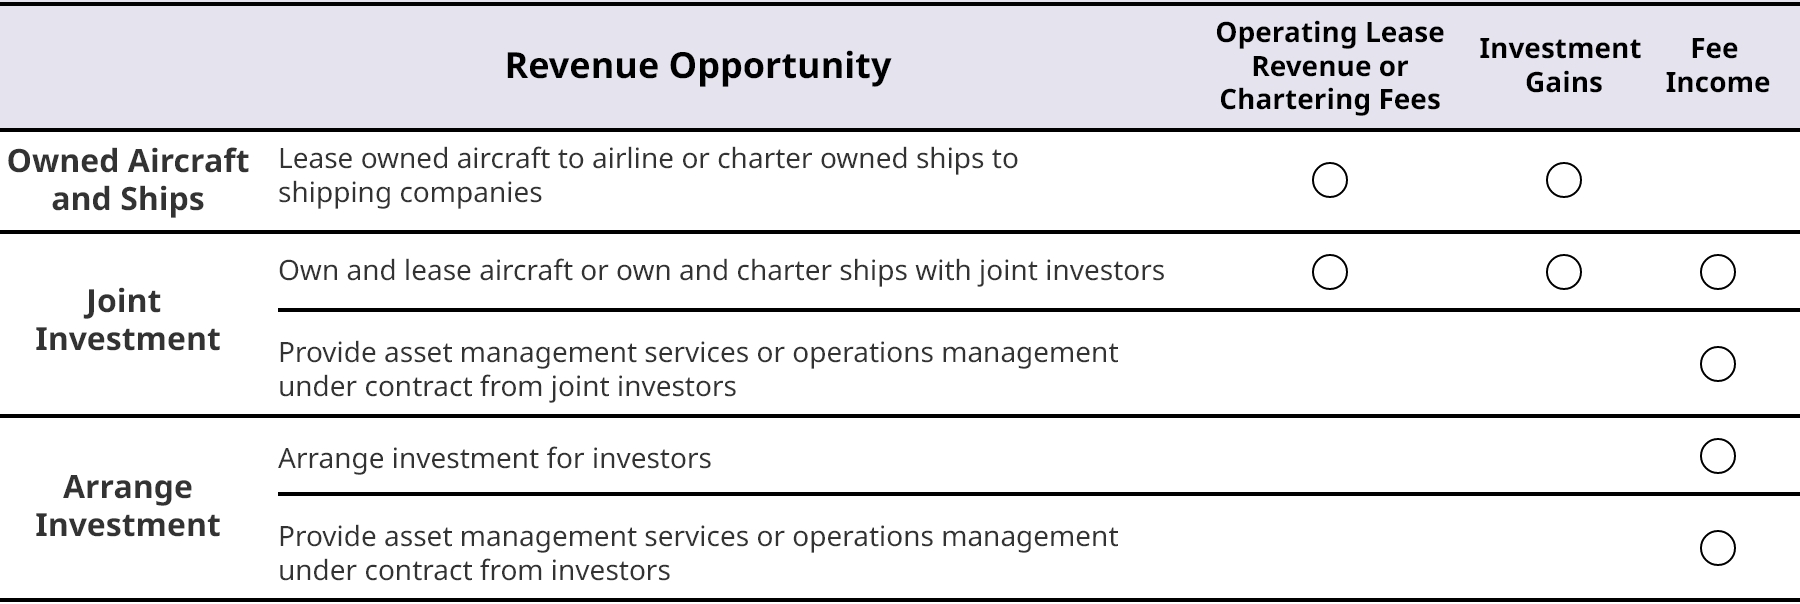 Revenue Opportunities for Aircraft and Ships